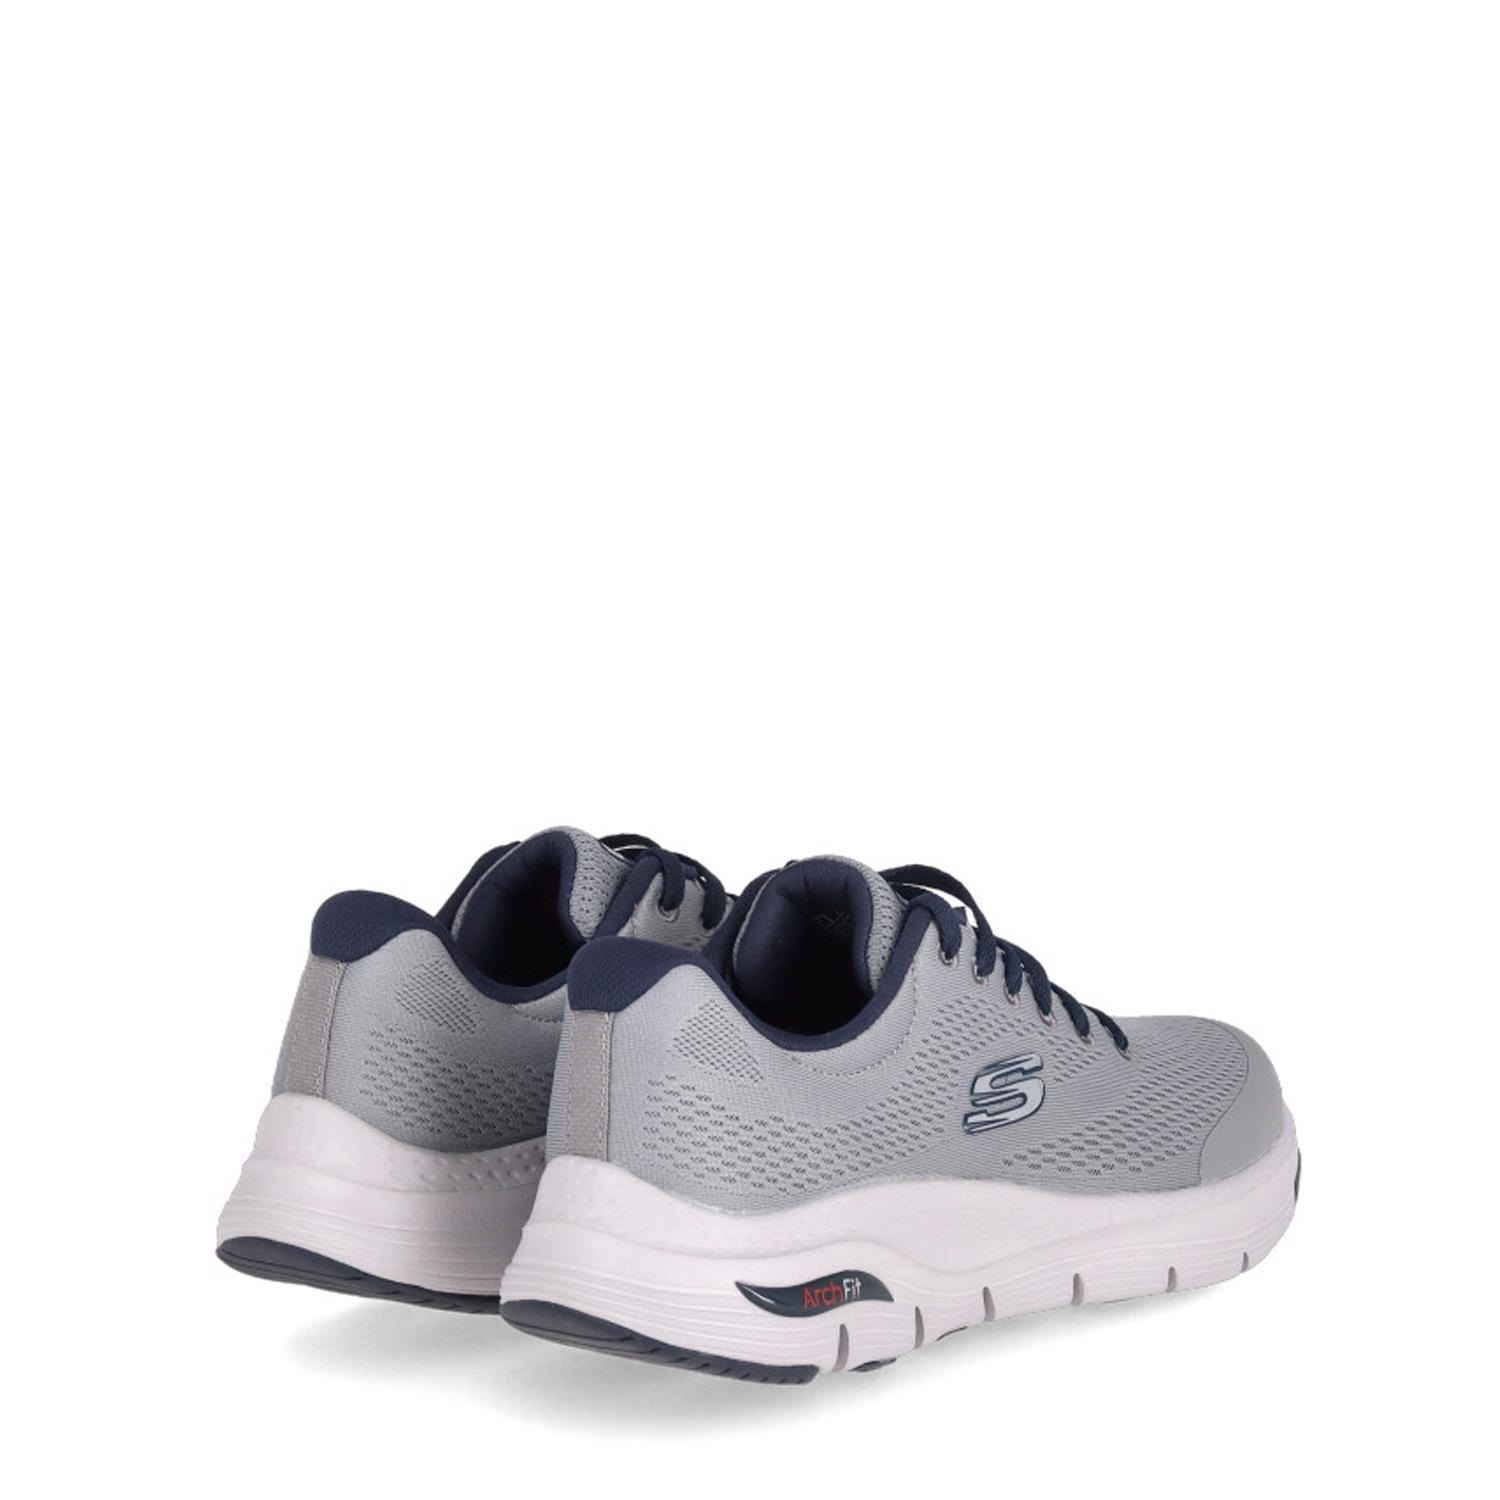 Skechers Arch Fit GRAY NAVY